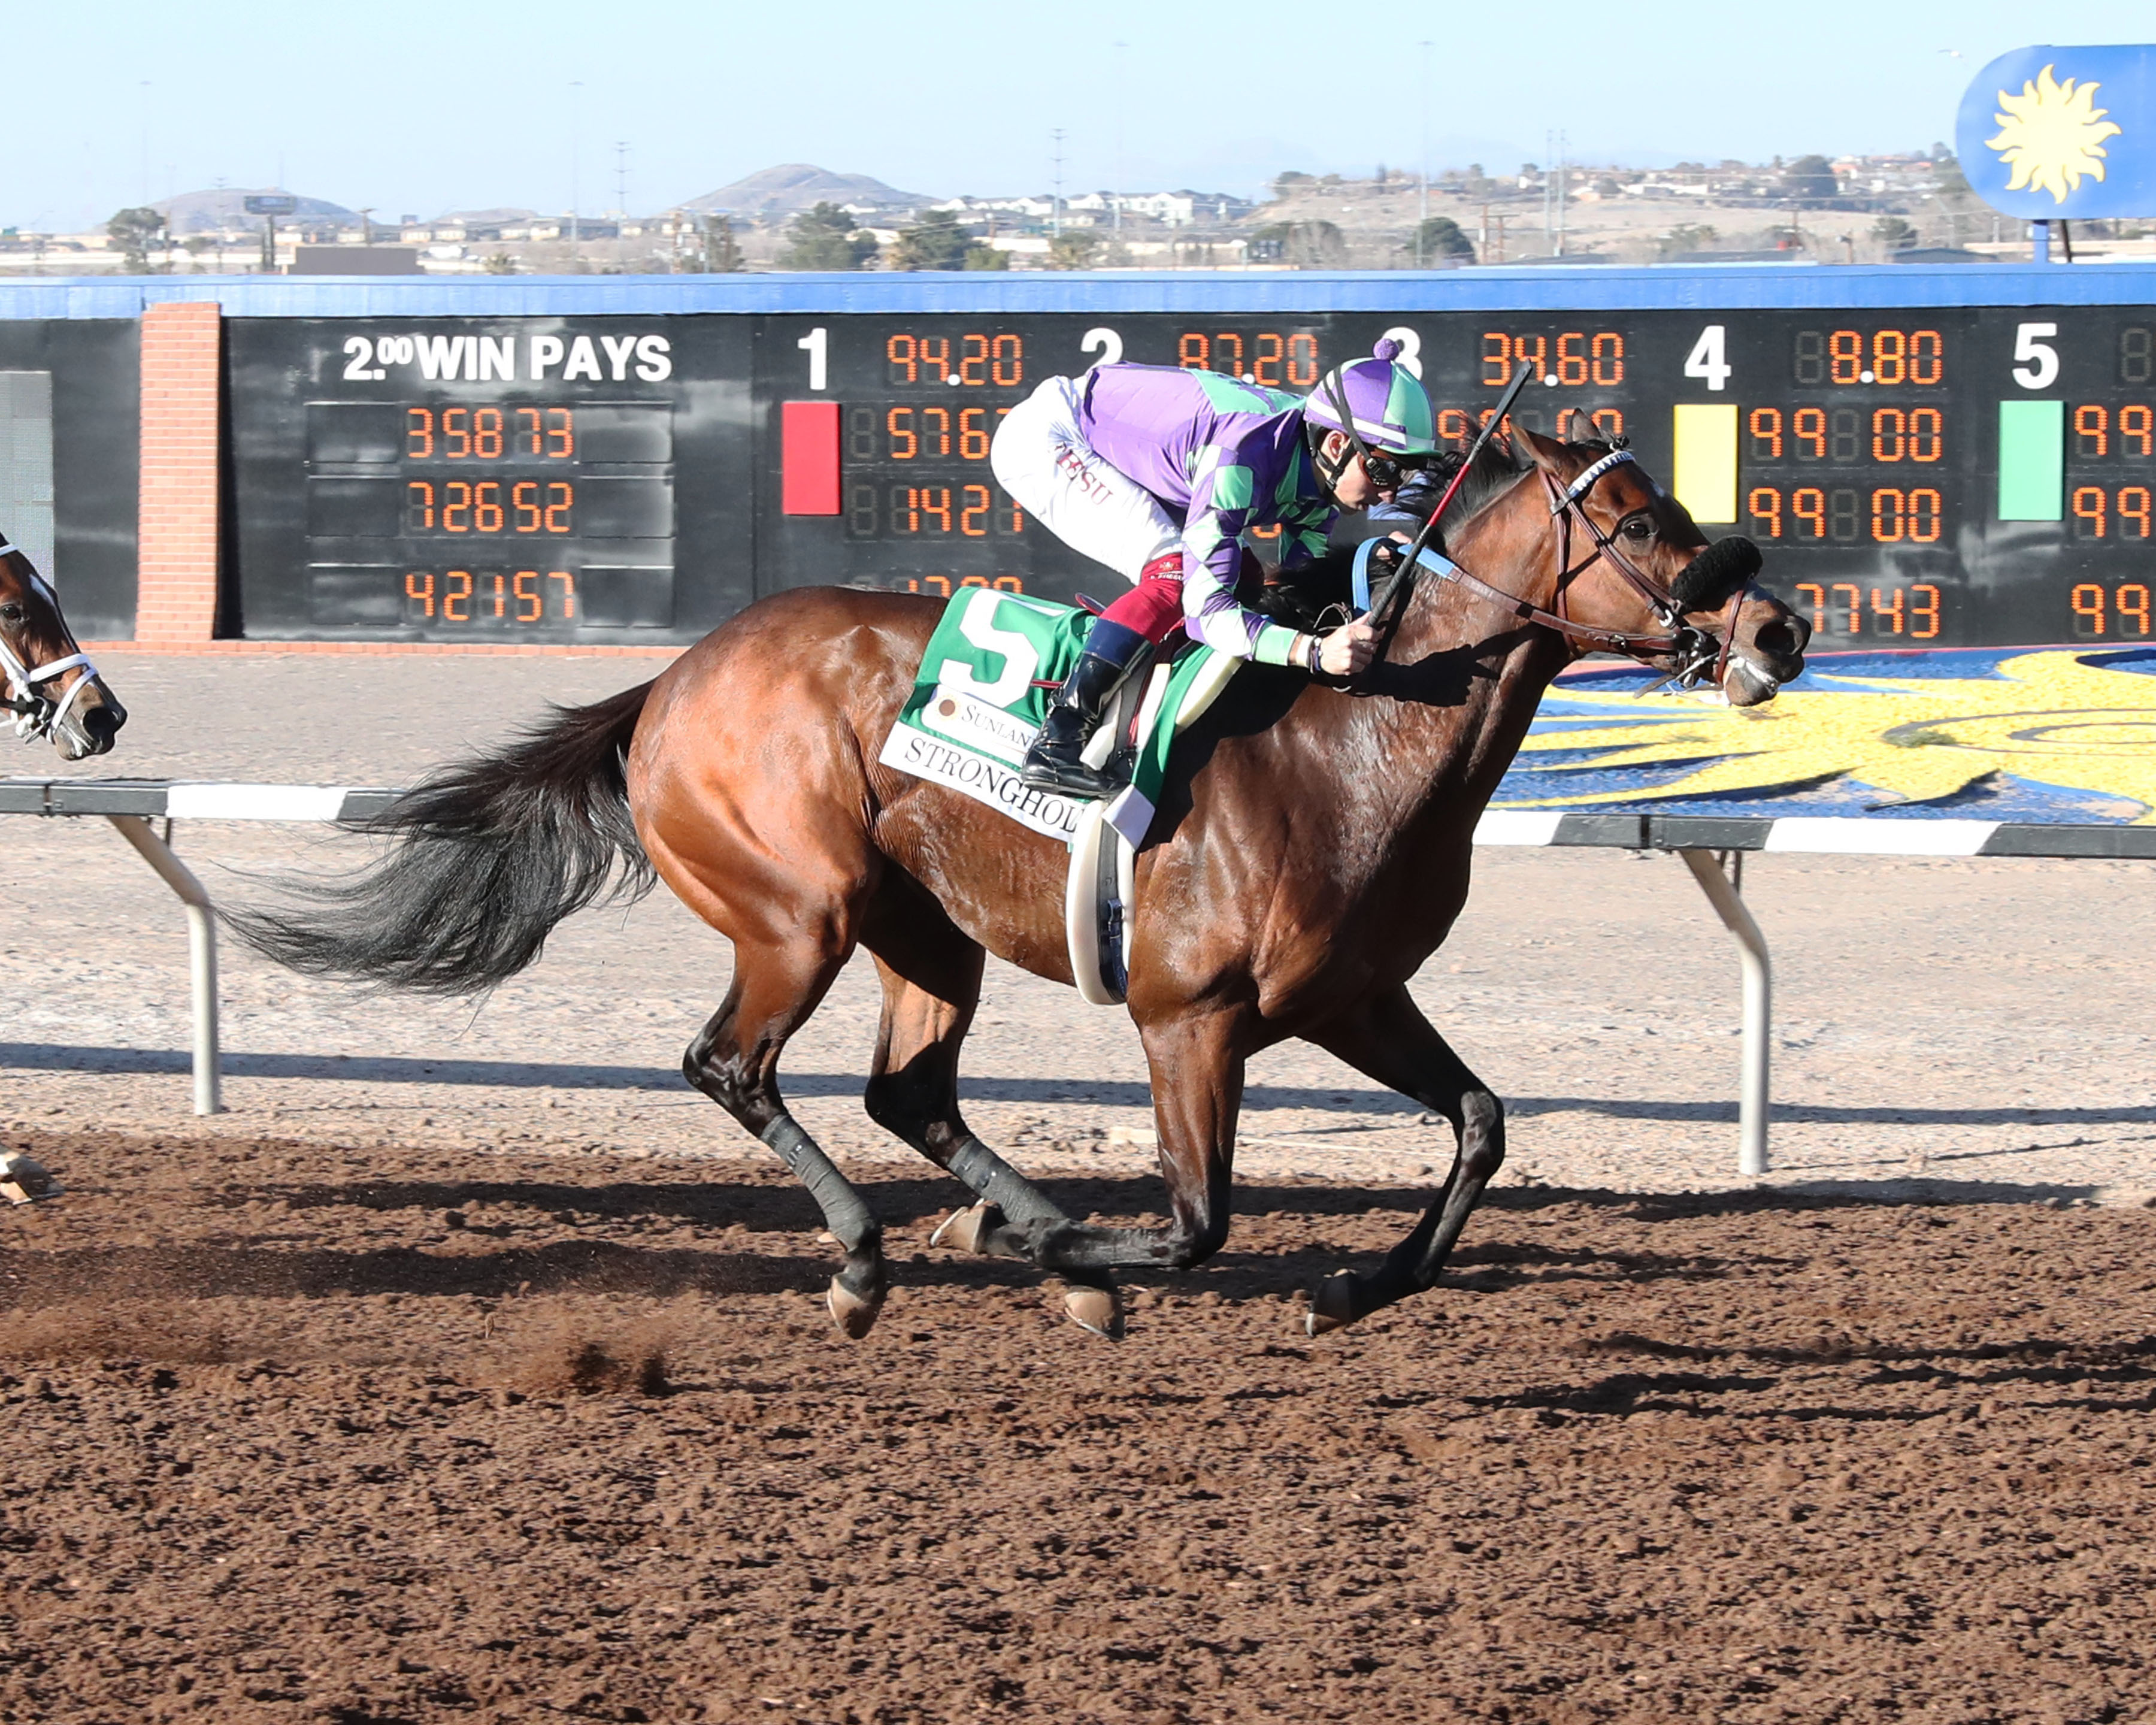 19th Running of the Sunland Derby shines in front of 15,446 in attendance Sunday afternoon